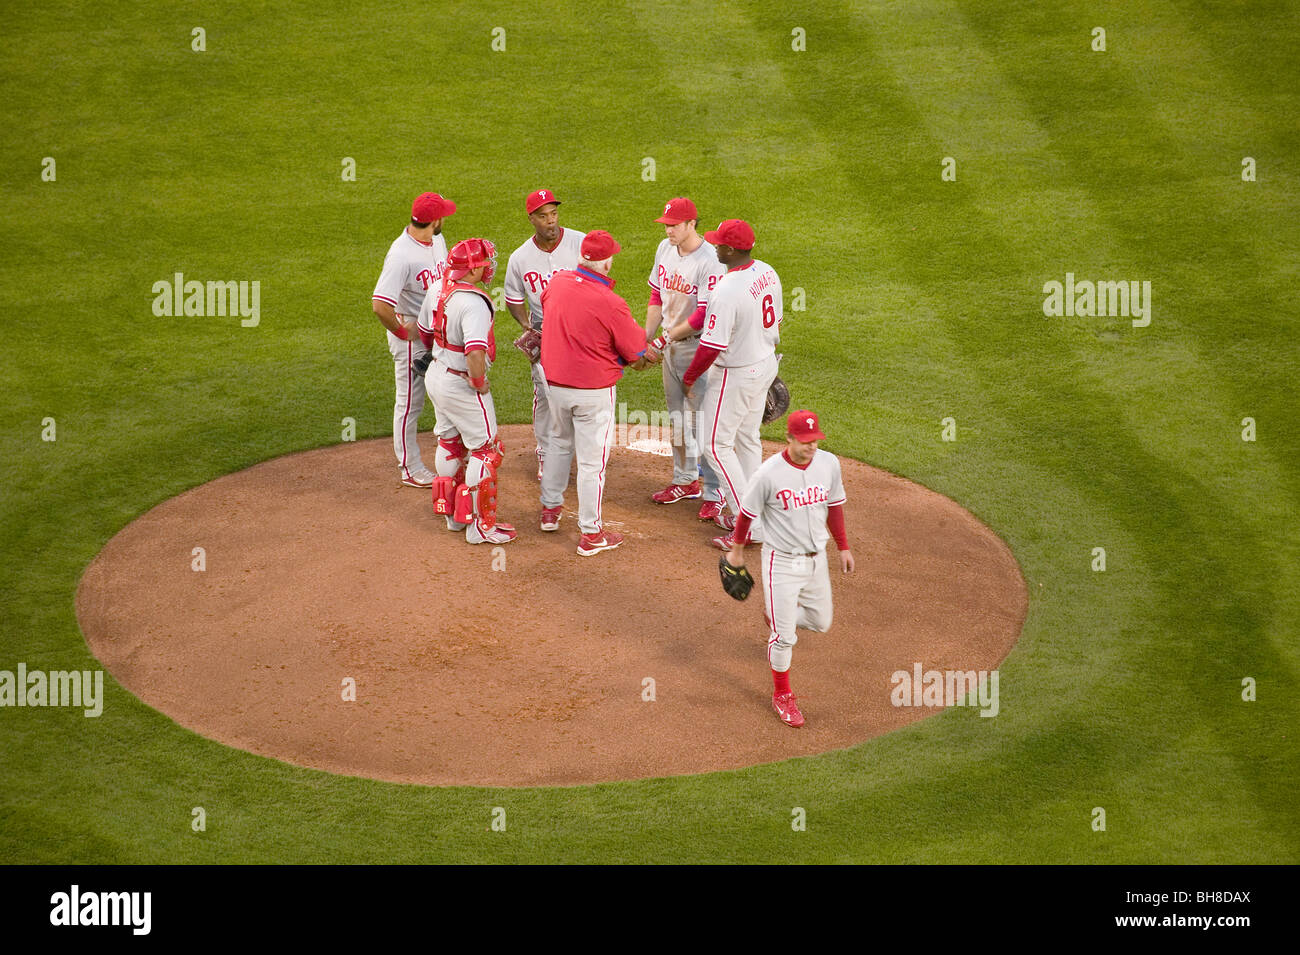 Philadelphia Phillies coach, pitcher and infielders meeting on mound during National League Championship Series (NLCS) Stock Photo